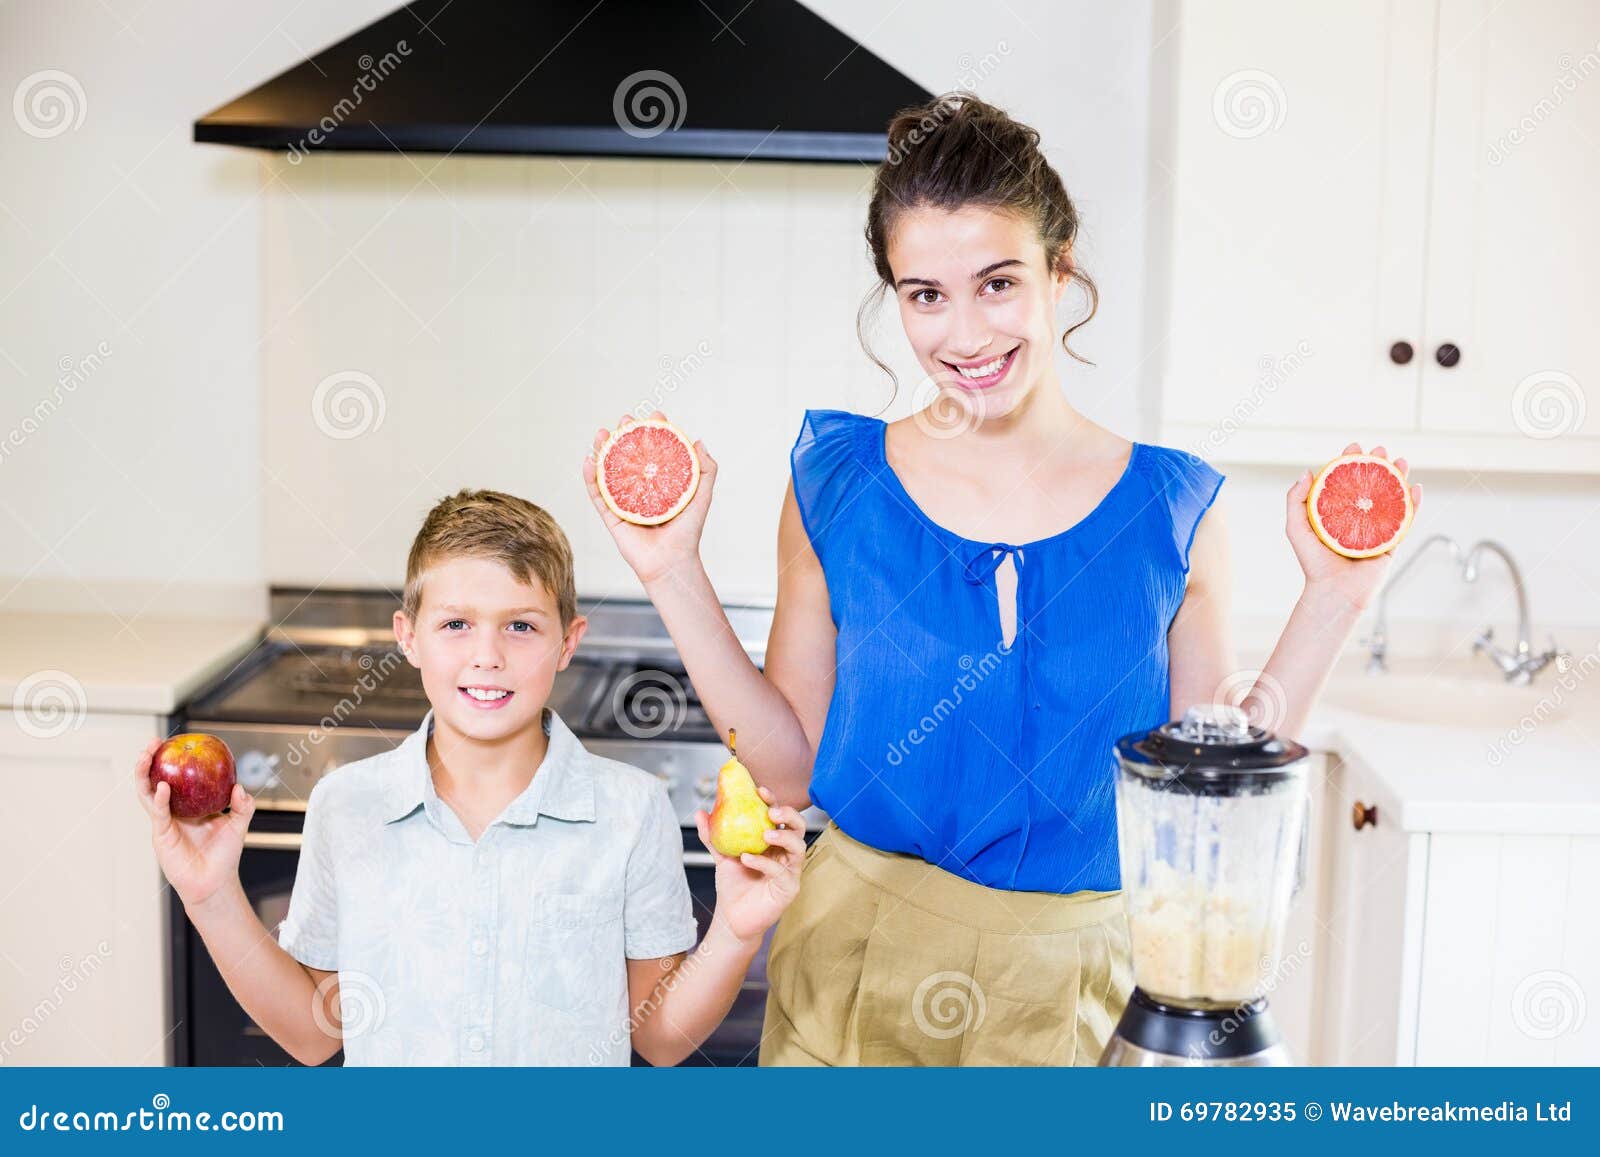 Mother And Son Holding Fruits In Kitchen Stock Image Image Of Bonding